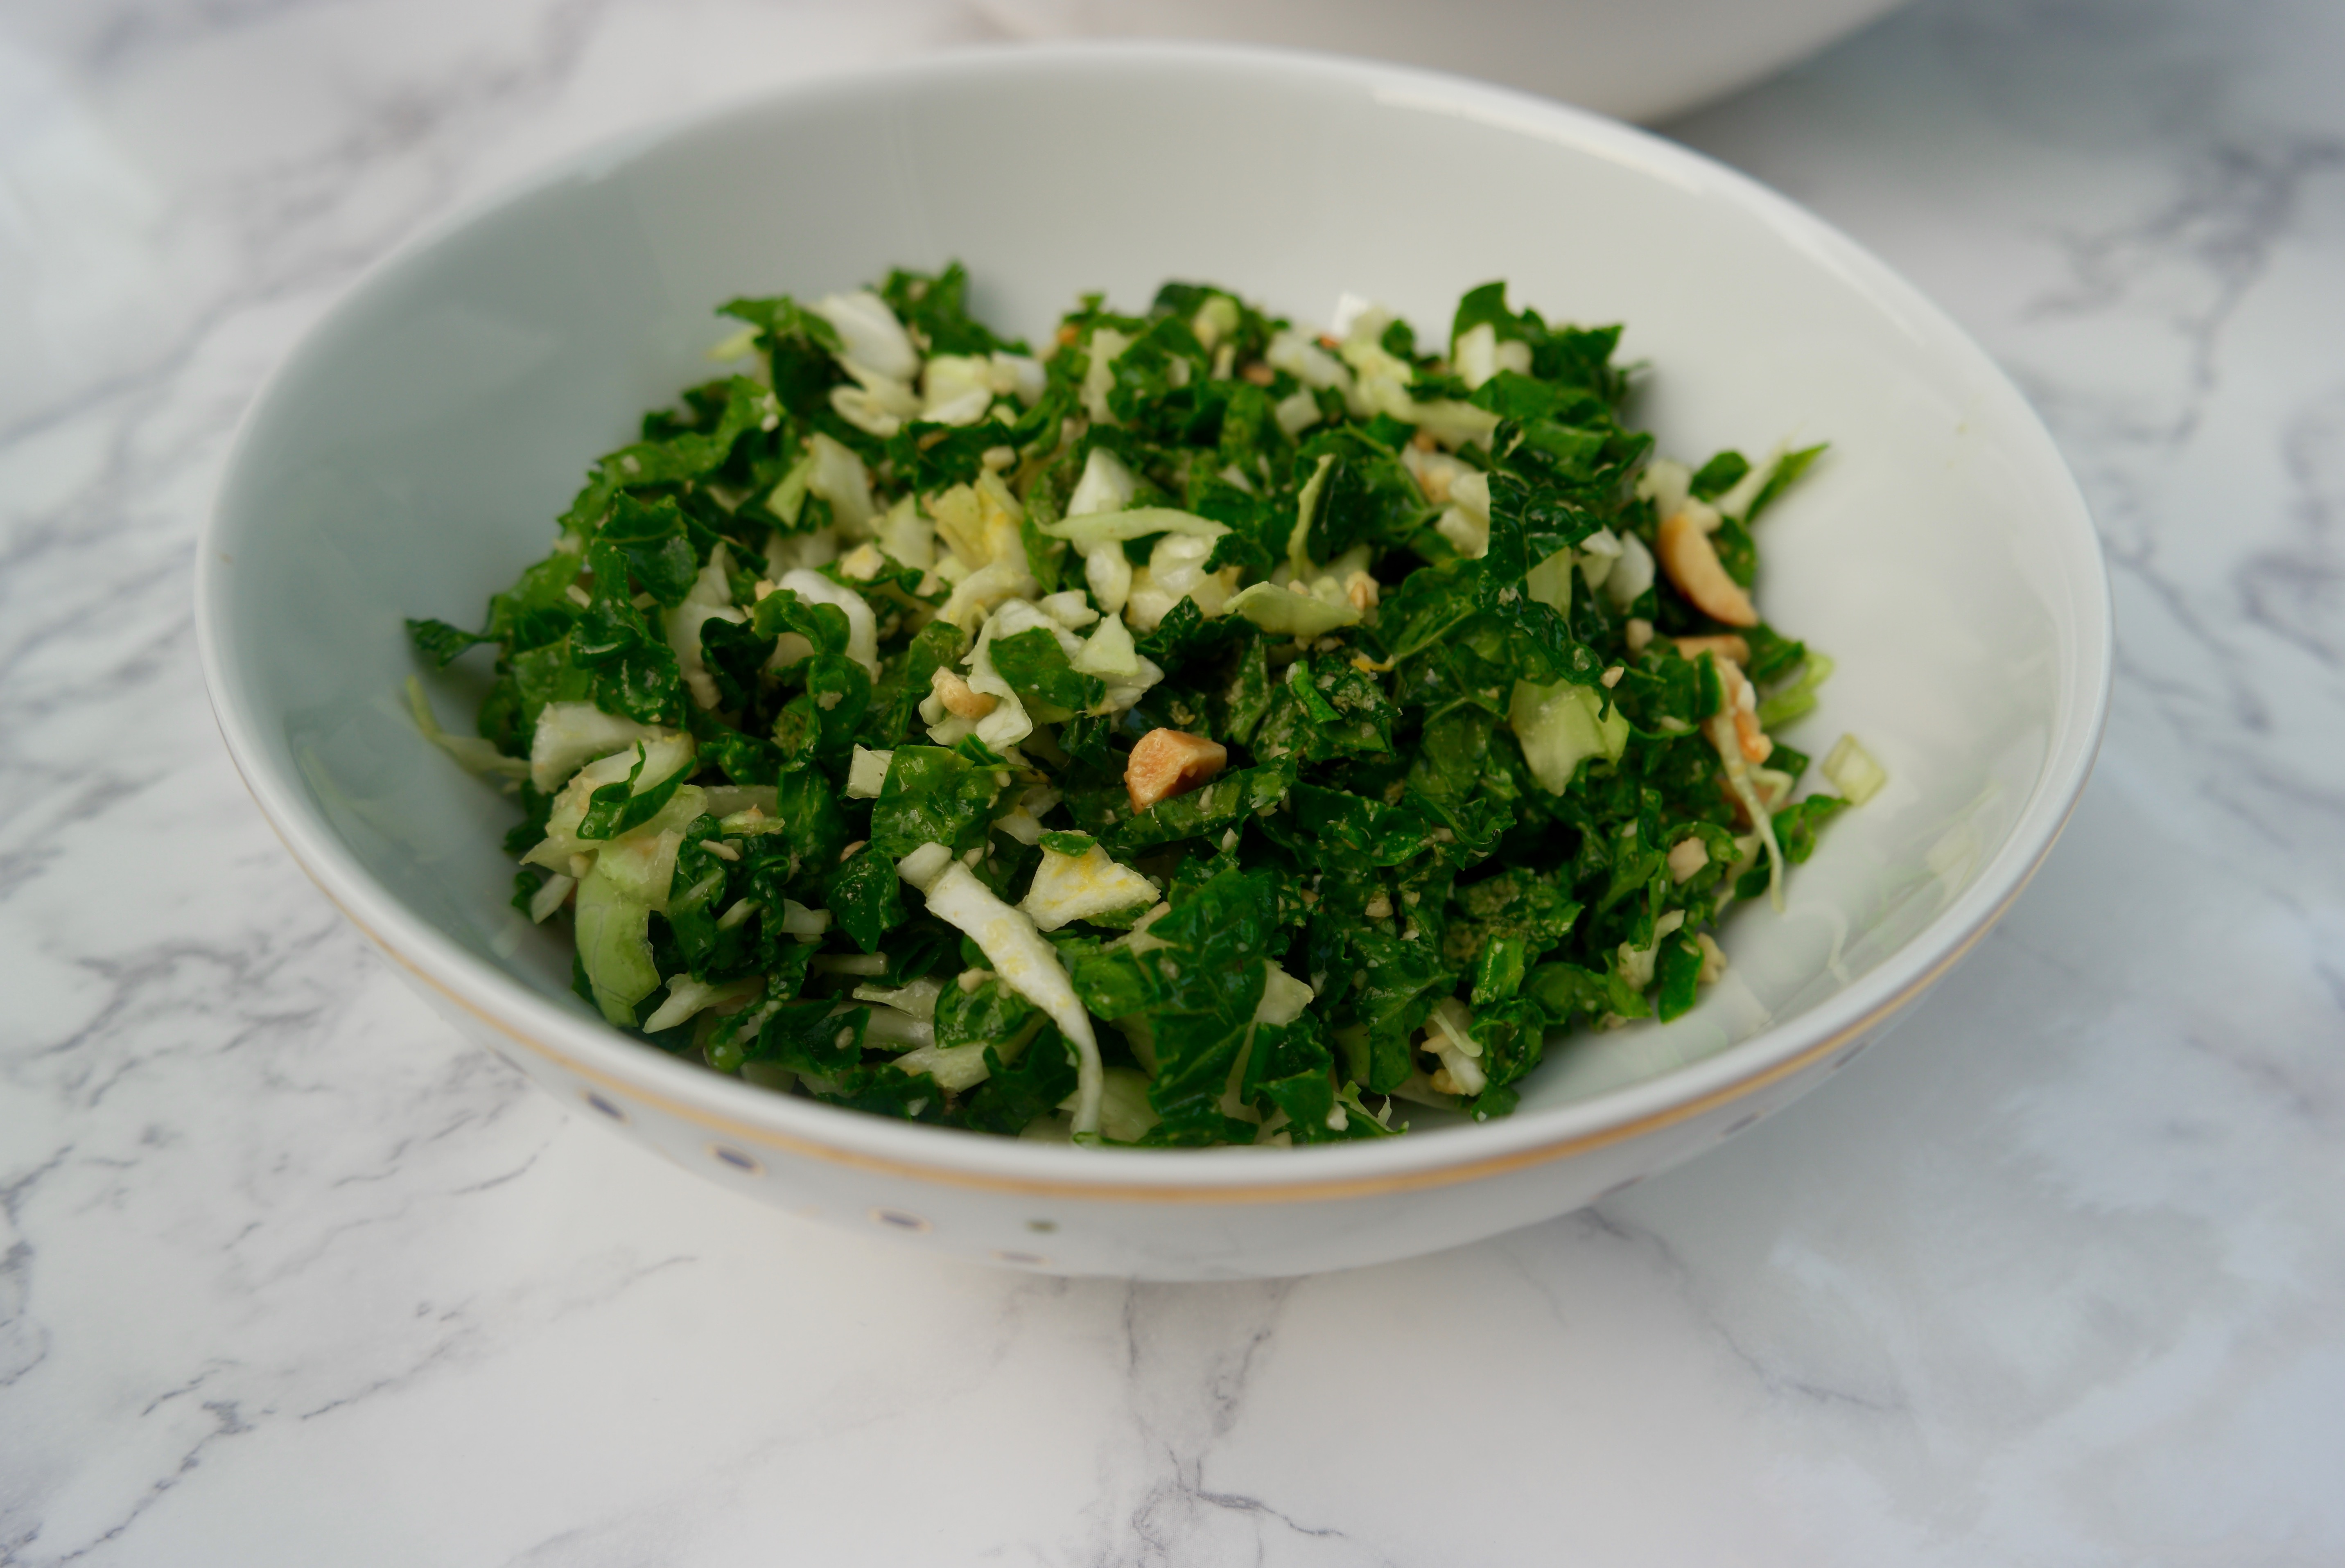 Kale Salad with Peanut Dressing Inspired by Hillstone Restaurants